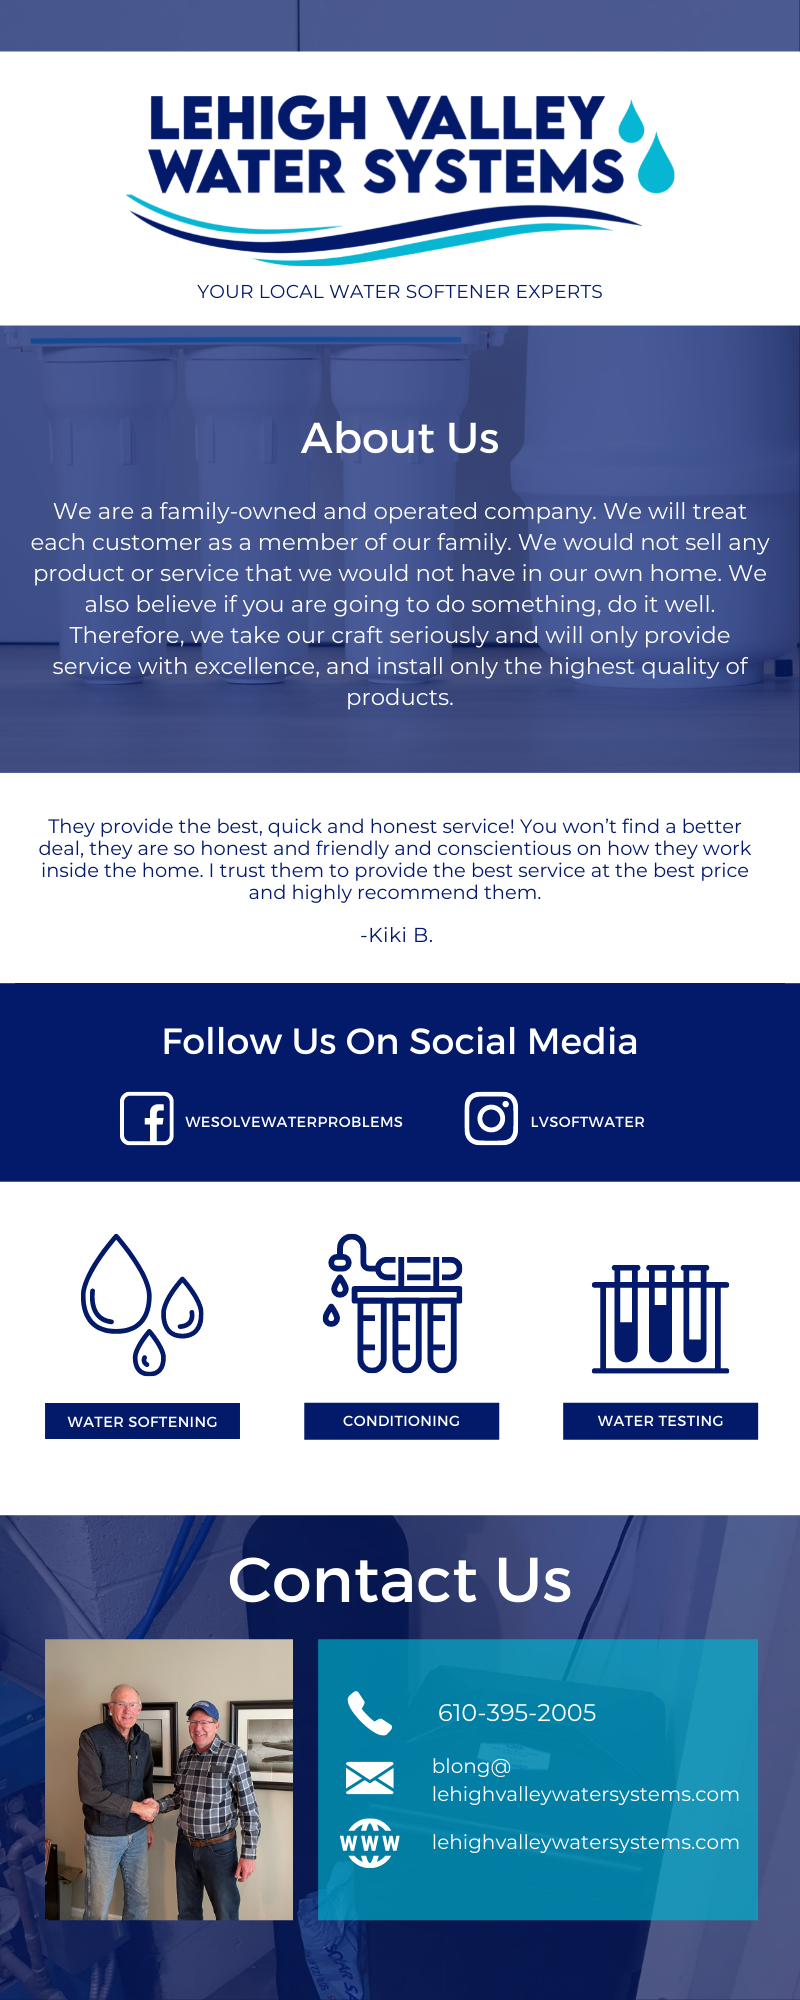 Lehigh Valley Water Systems Infographic